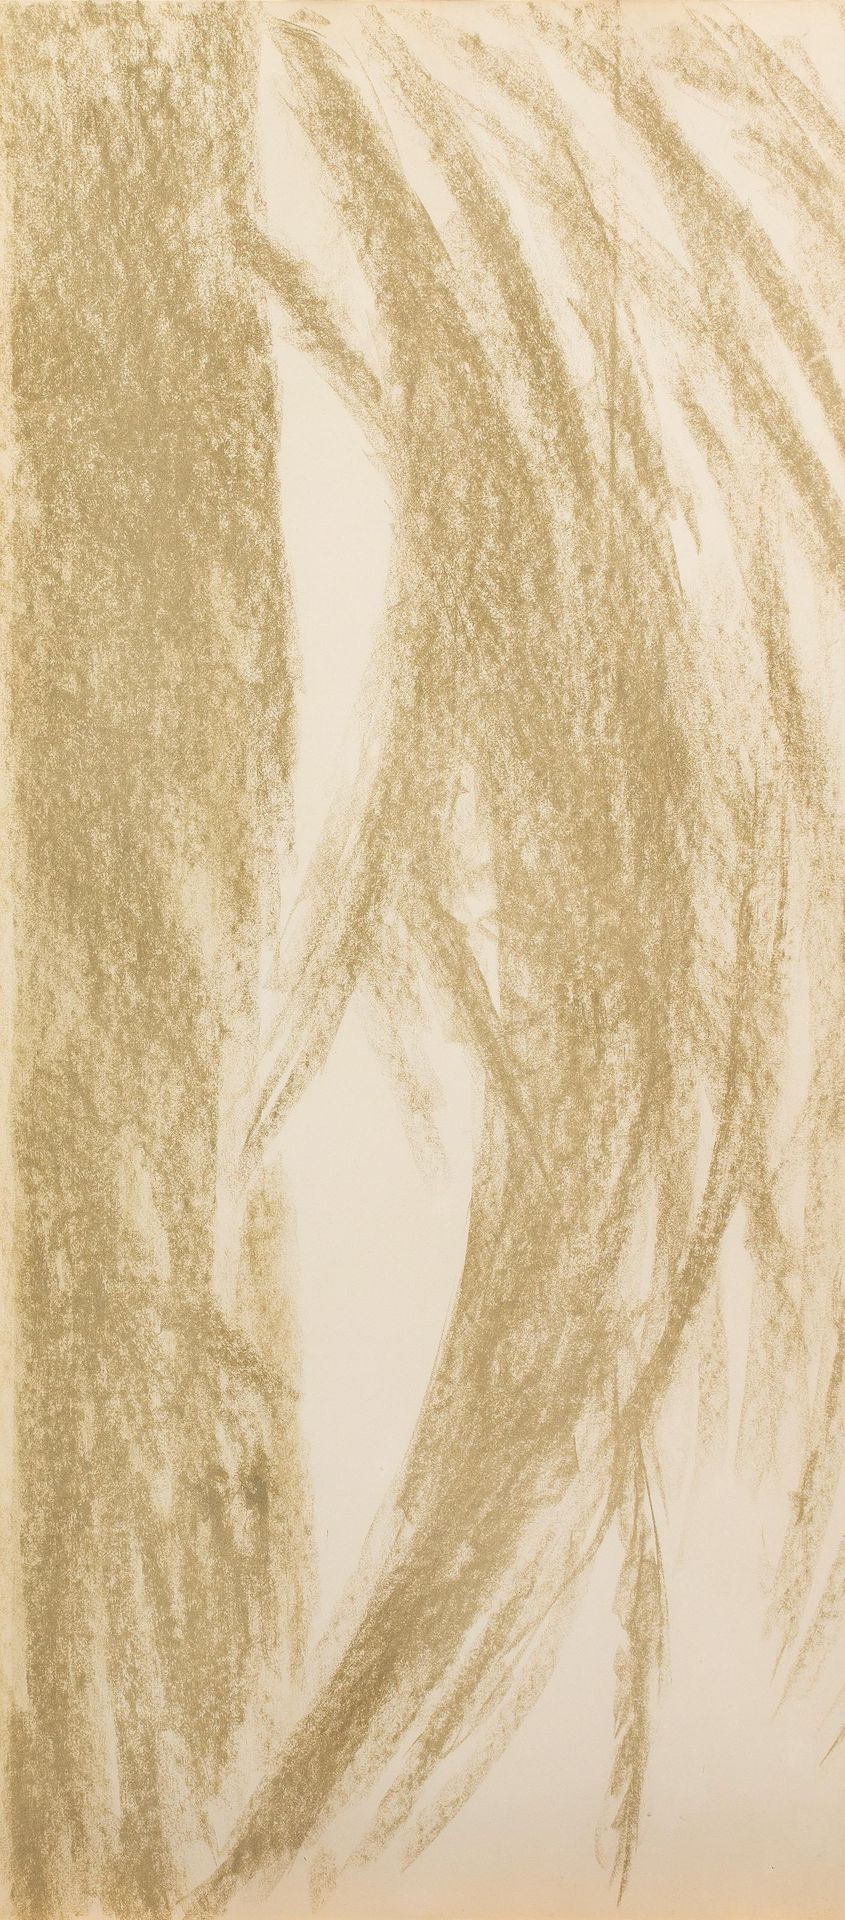 TOON VERHOEF (1946) Untitled, 1976.
Chalk on paper. Signature and date on verso.&hellip;